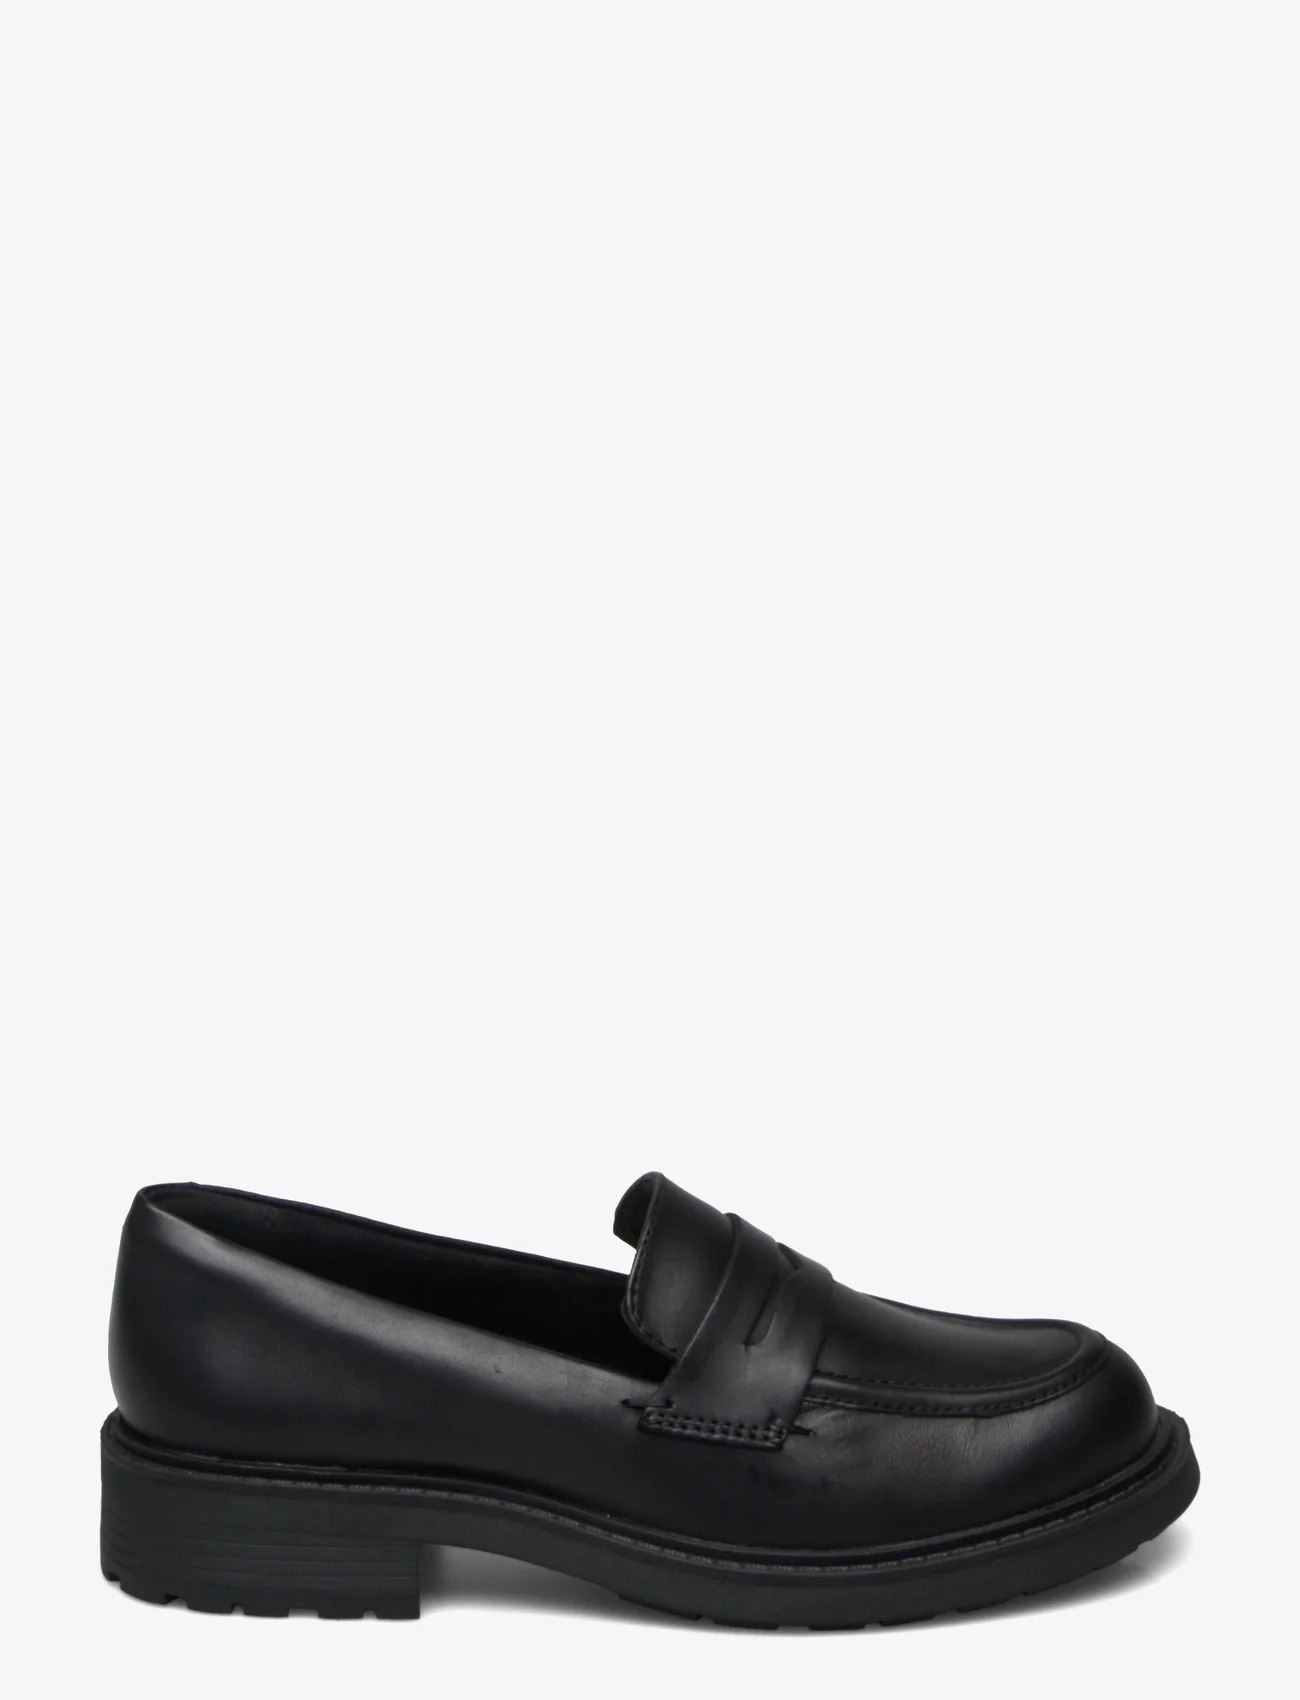 Clarks - Orinoco2 Penny D - birthday gifts - 1216 black leather - 1